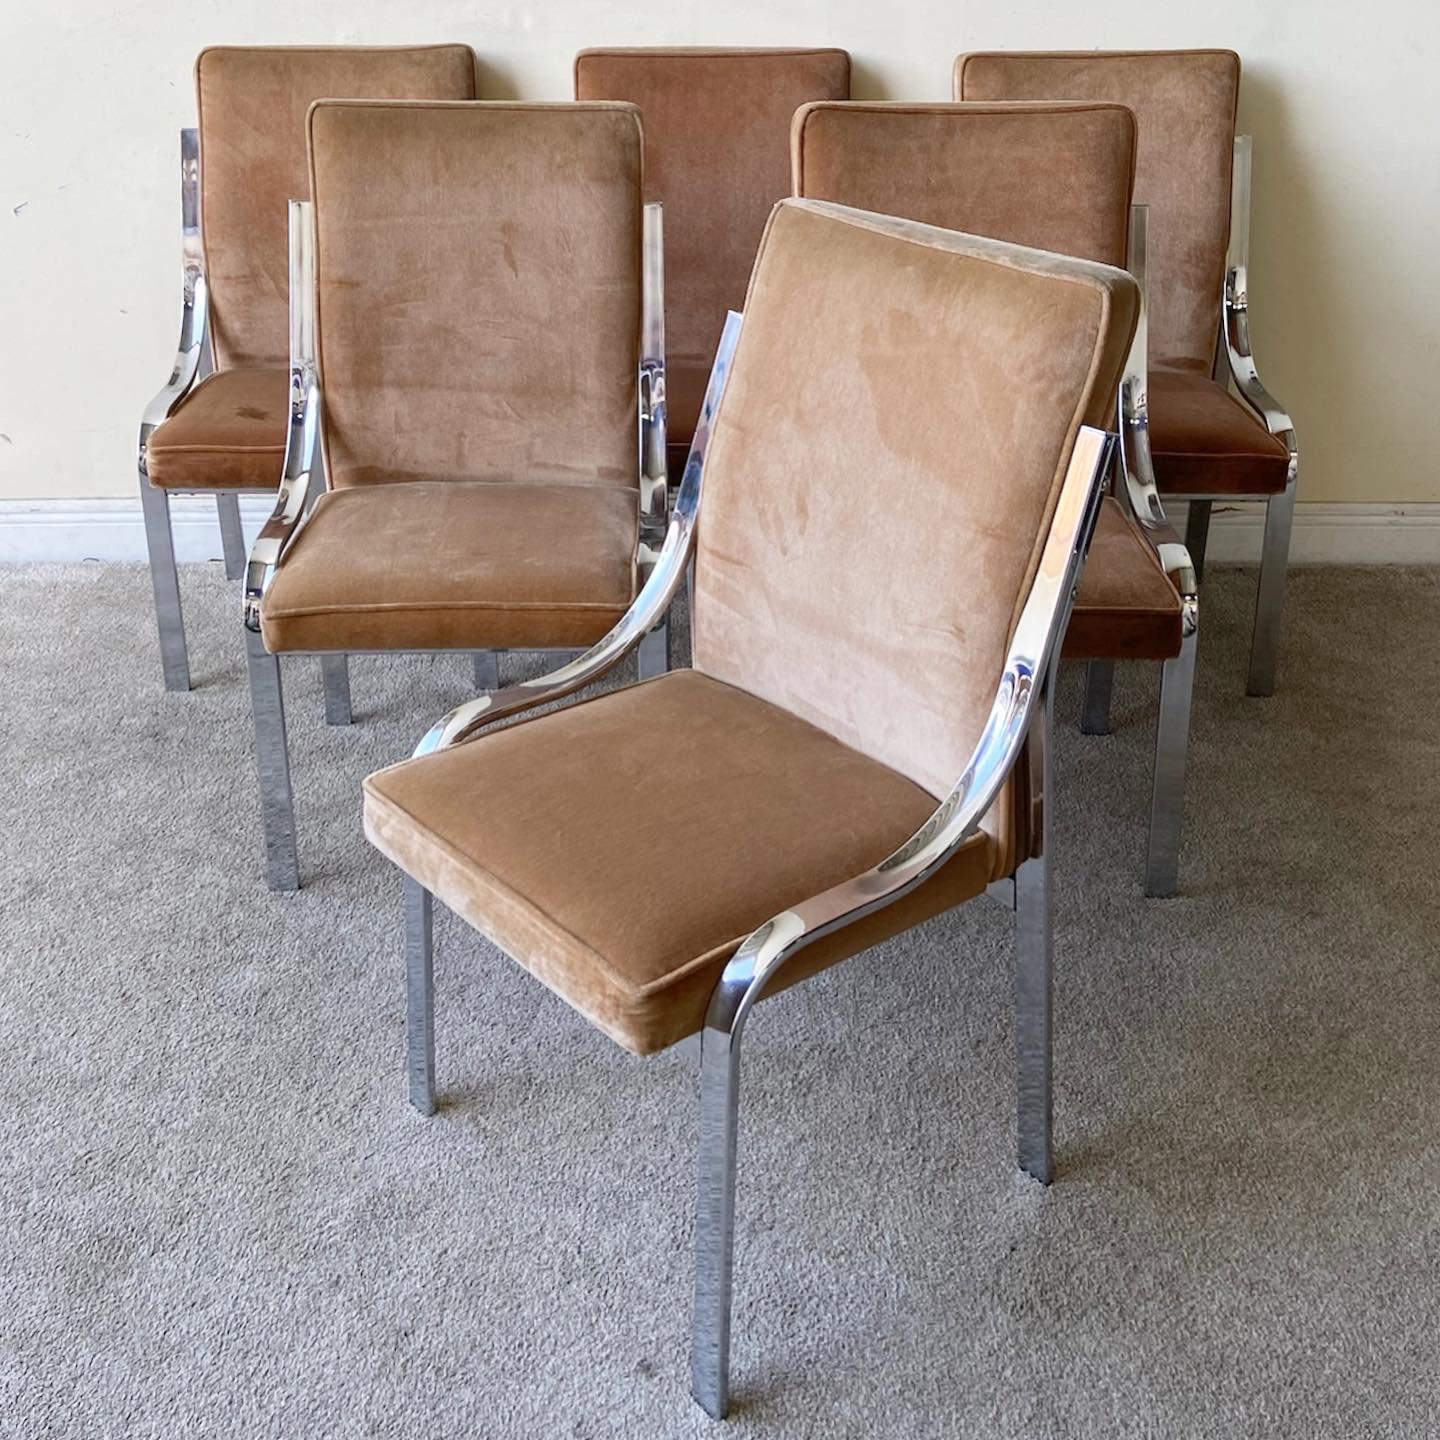 Mid Century Modern Brown Velvet & Chrome Dining Chairs - 6 Pieces 1